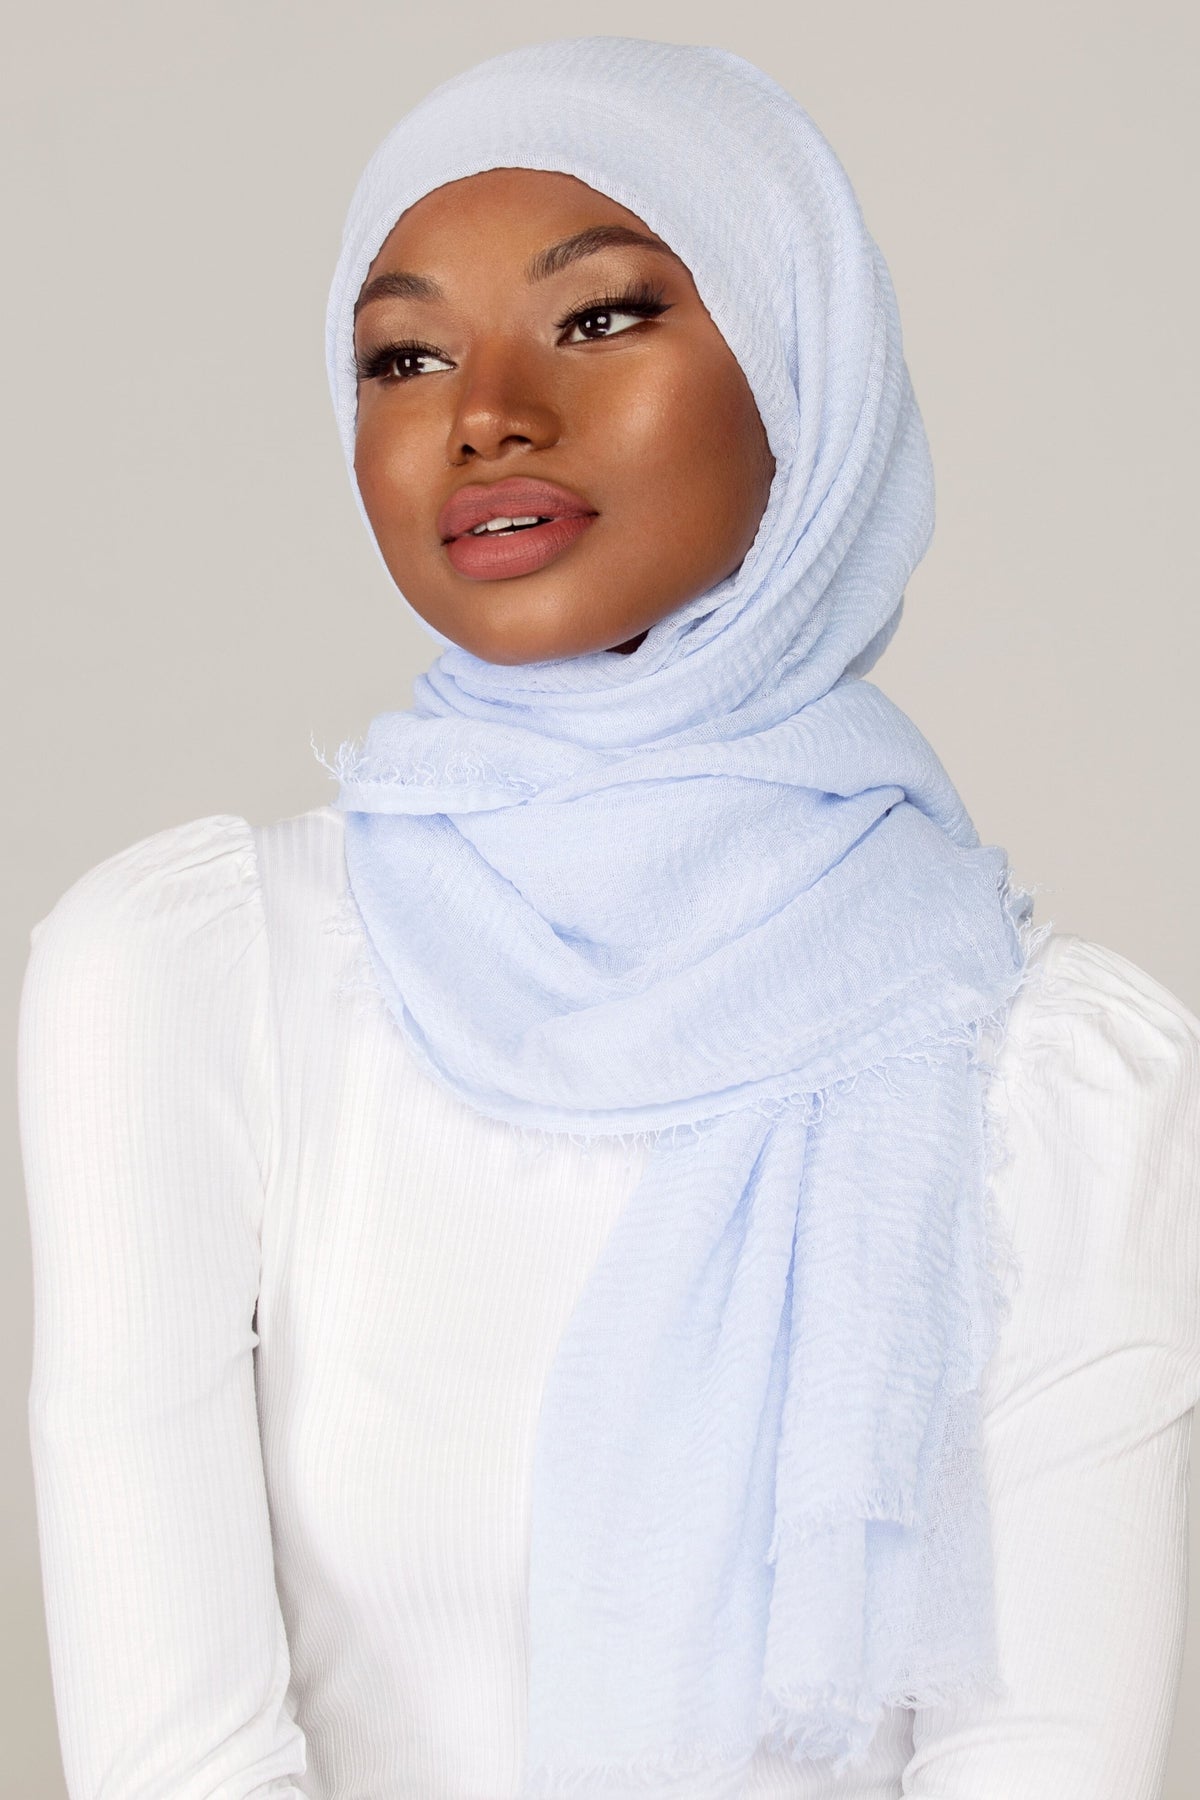 Everyday Crinkle Hijab - Hydrangea Veiled Collection 